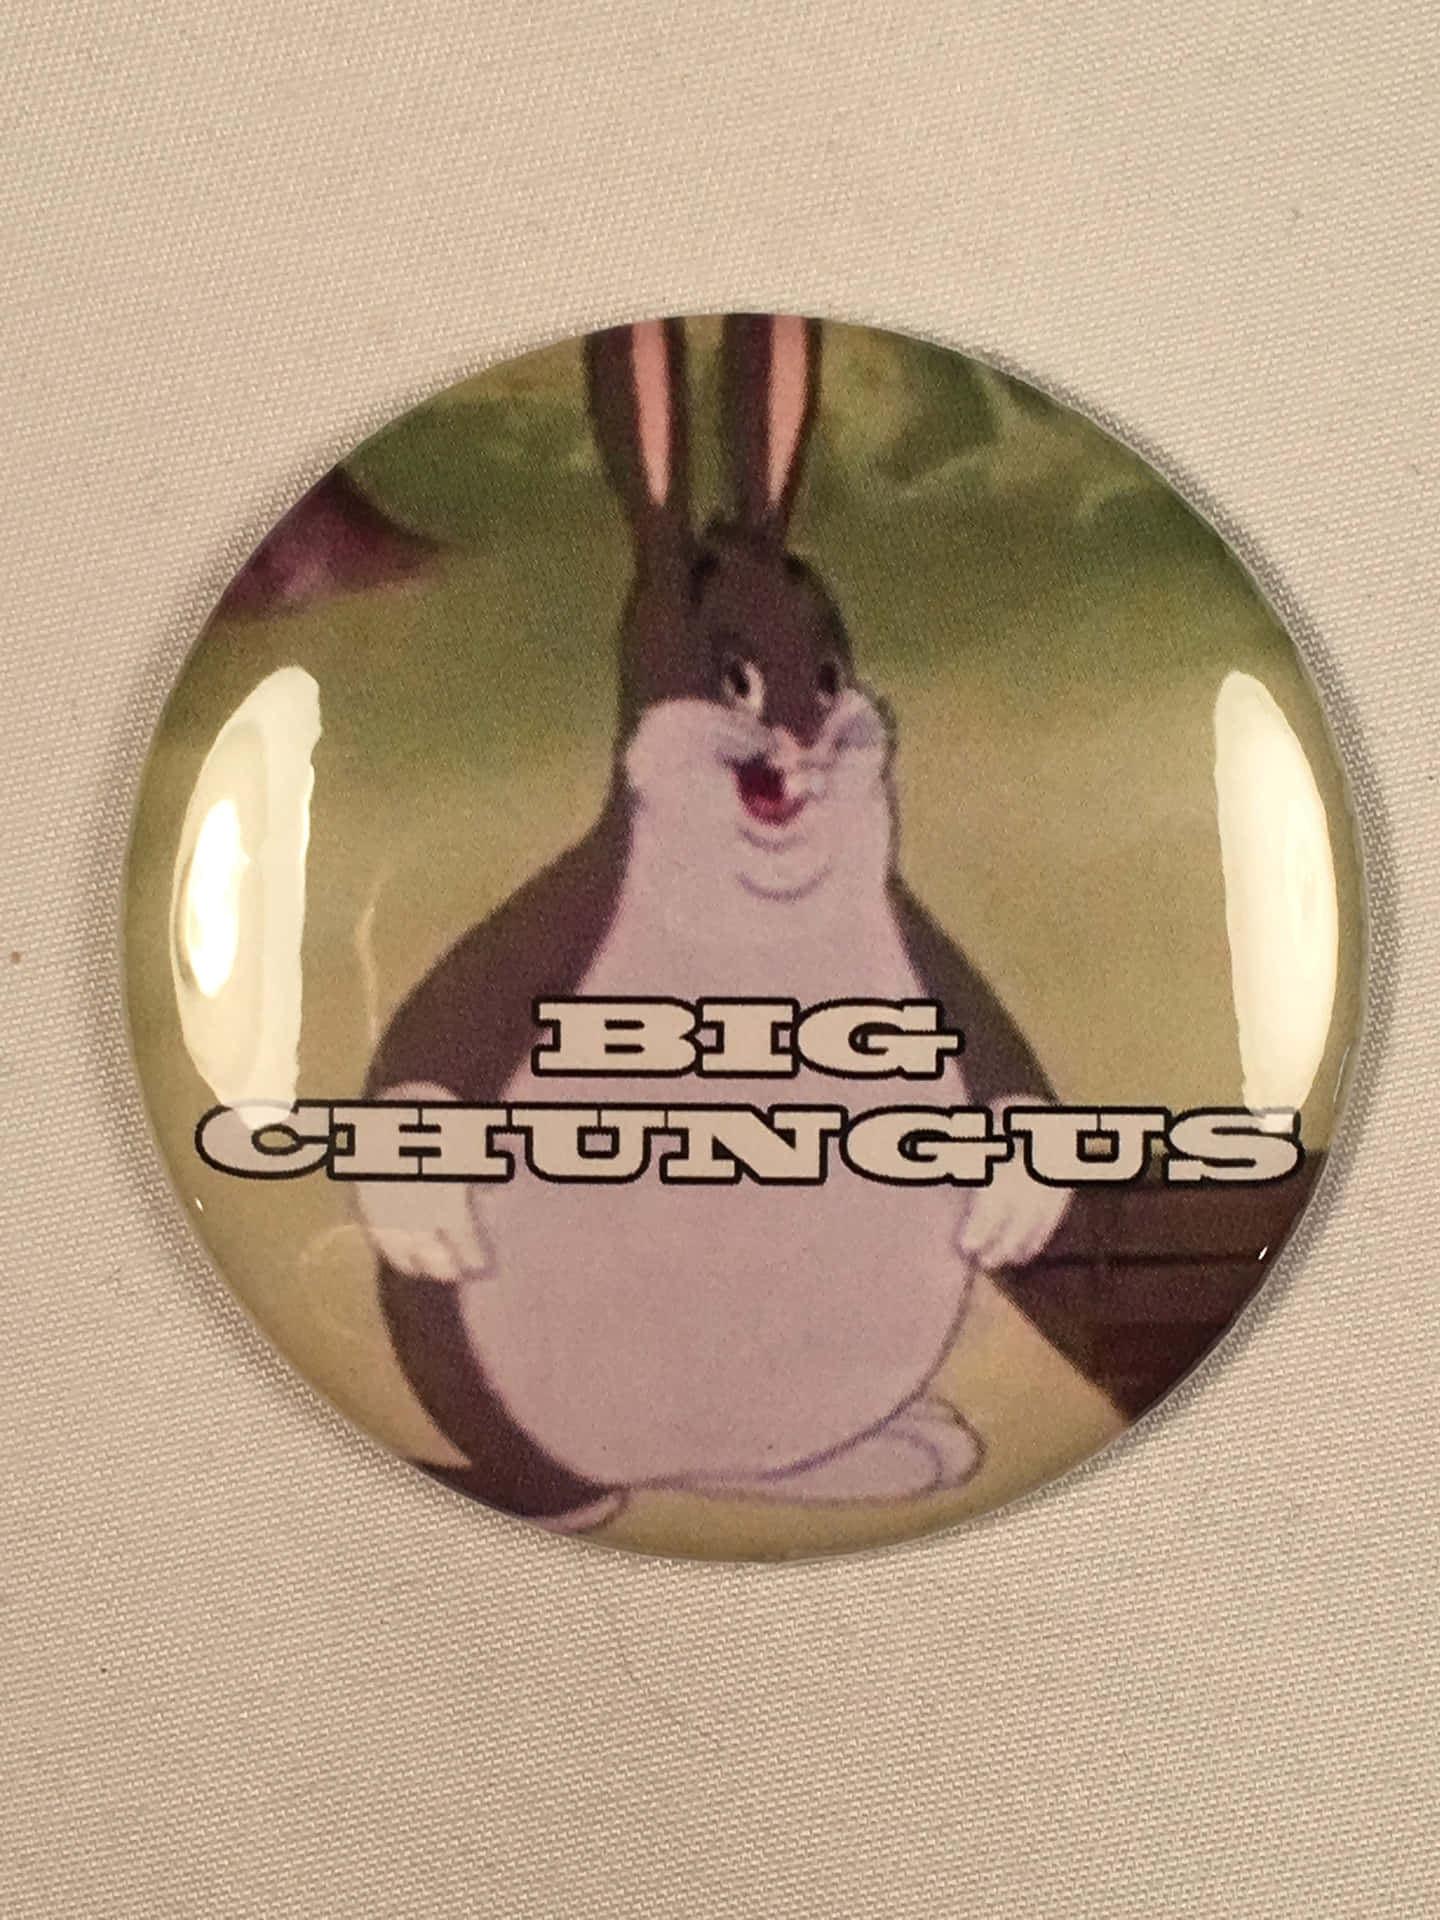 Join the Big Chungus craze and feel the power! Wallpaper